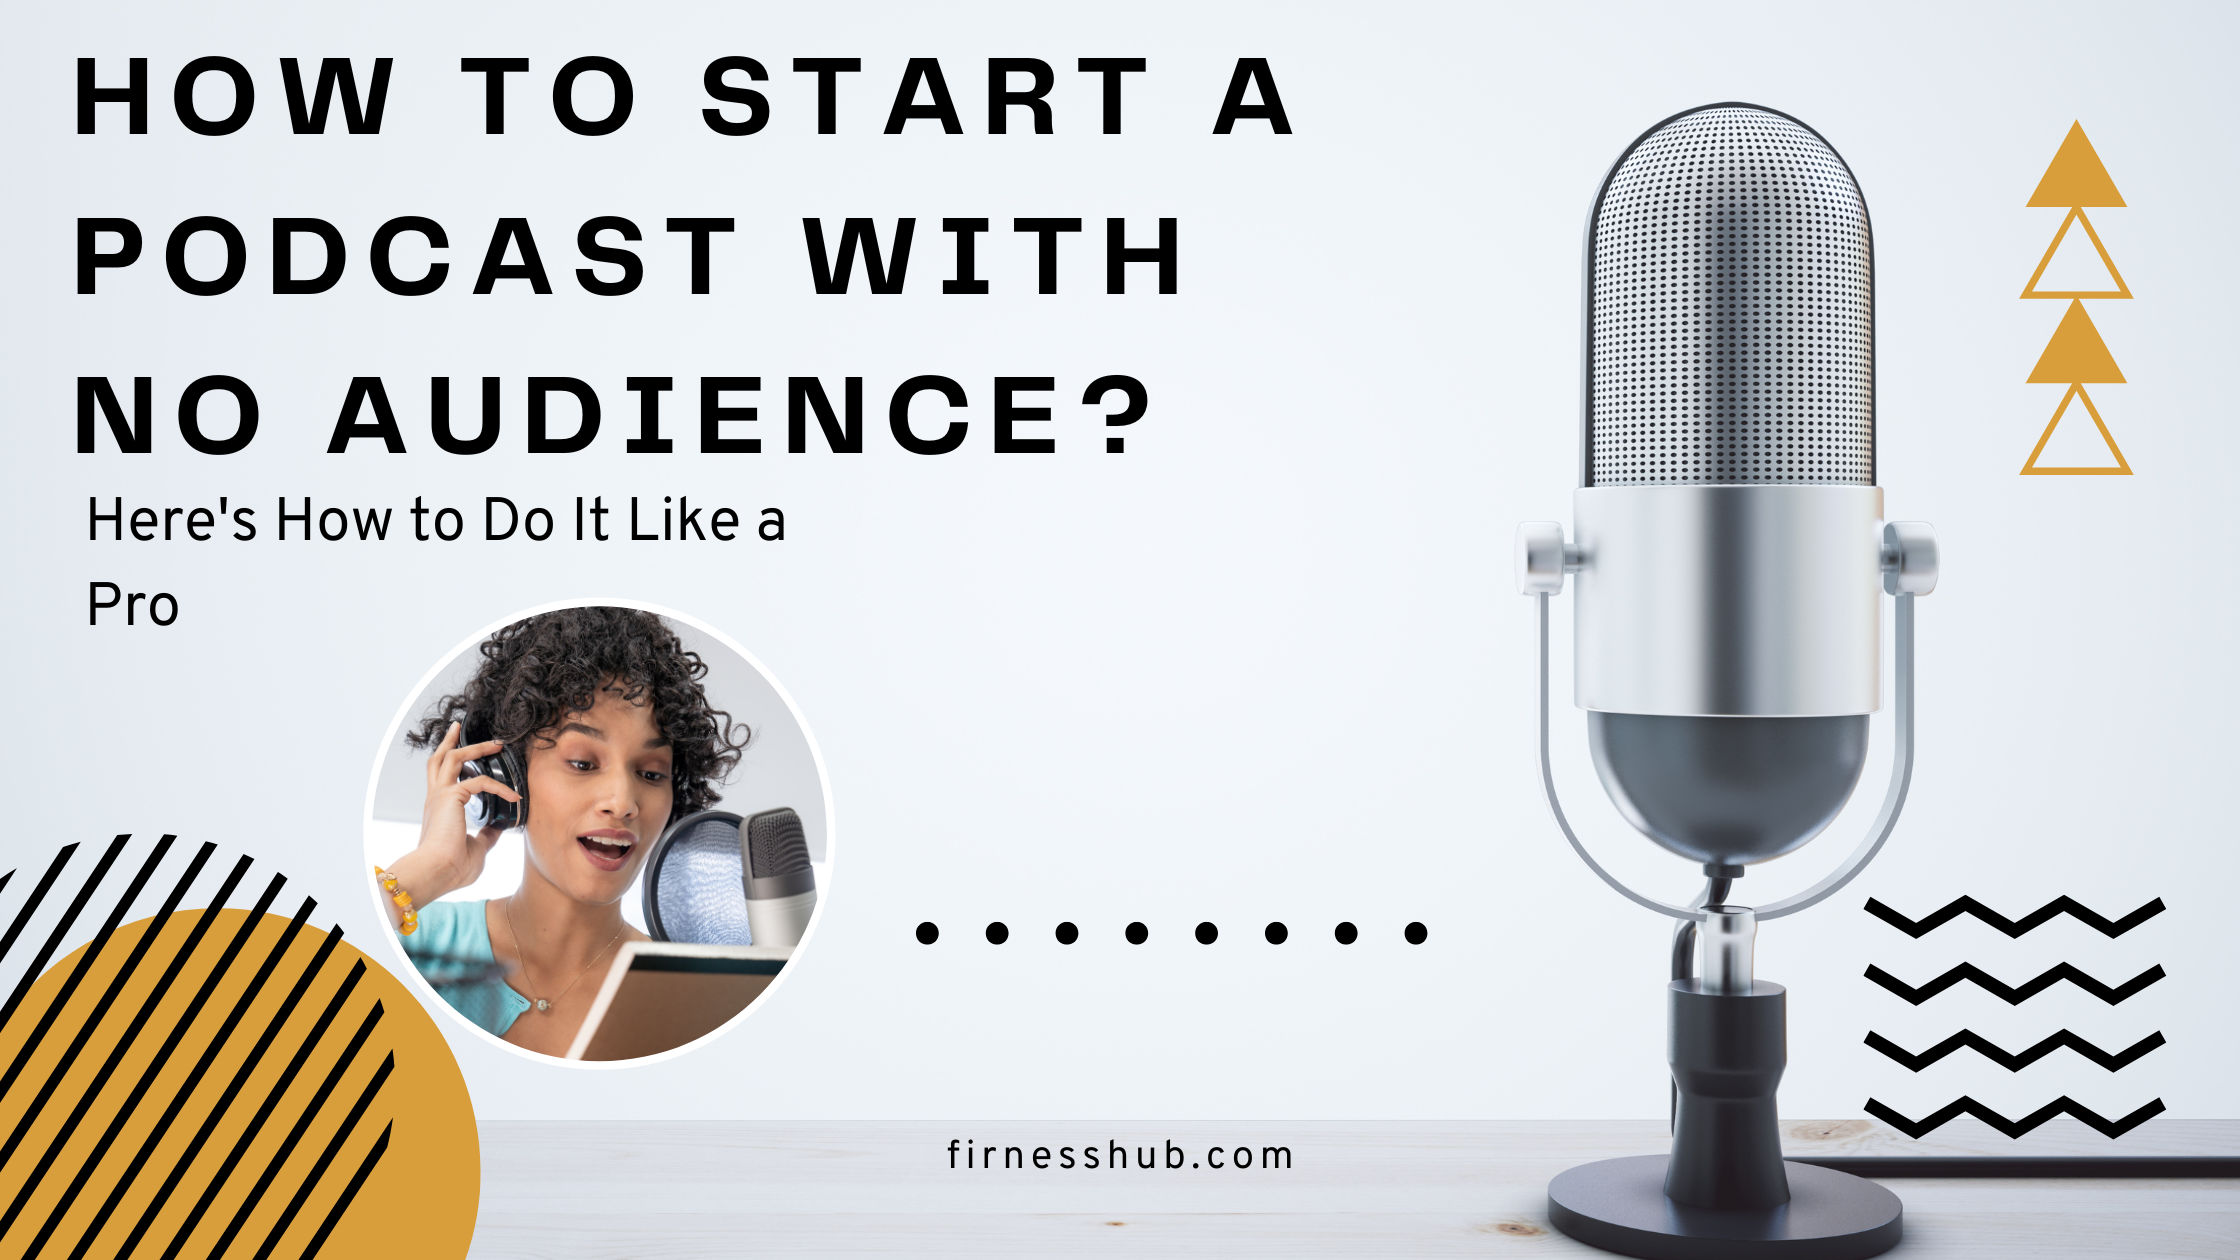 Start A Podcast with No Audience